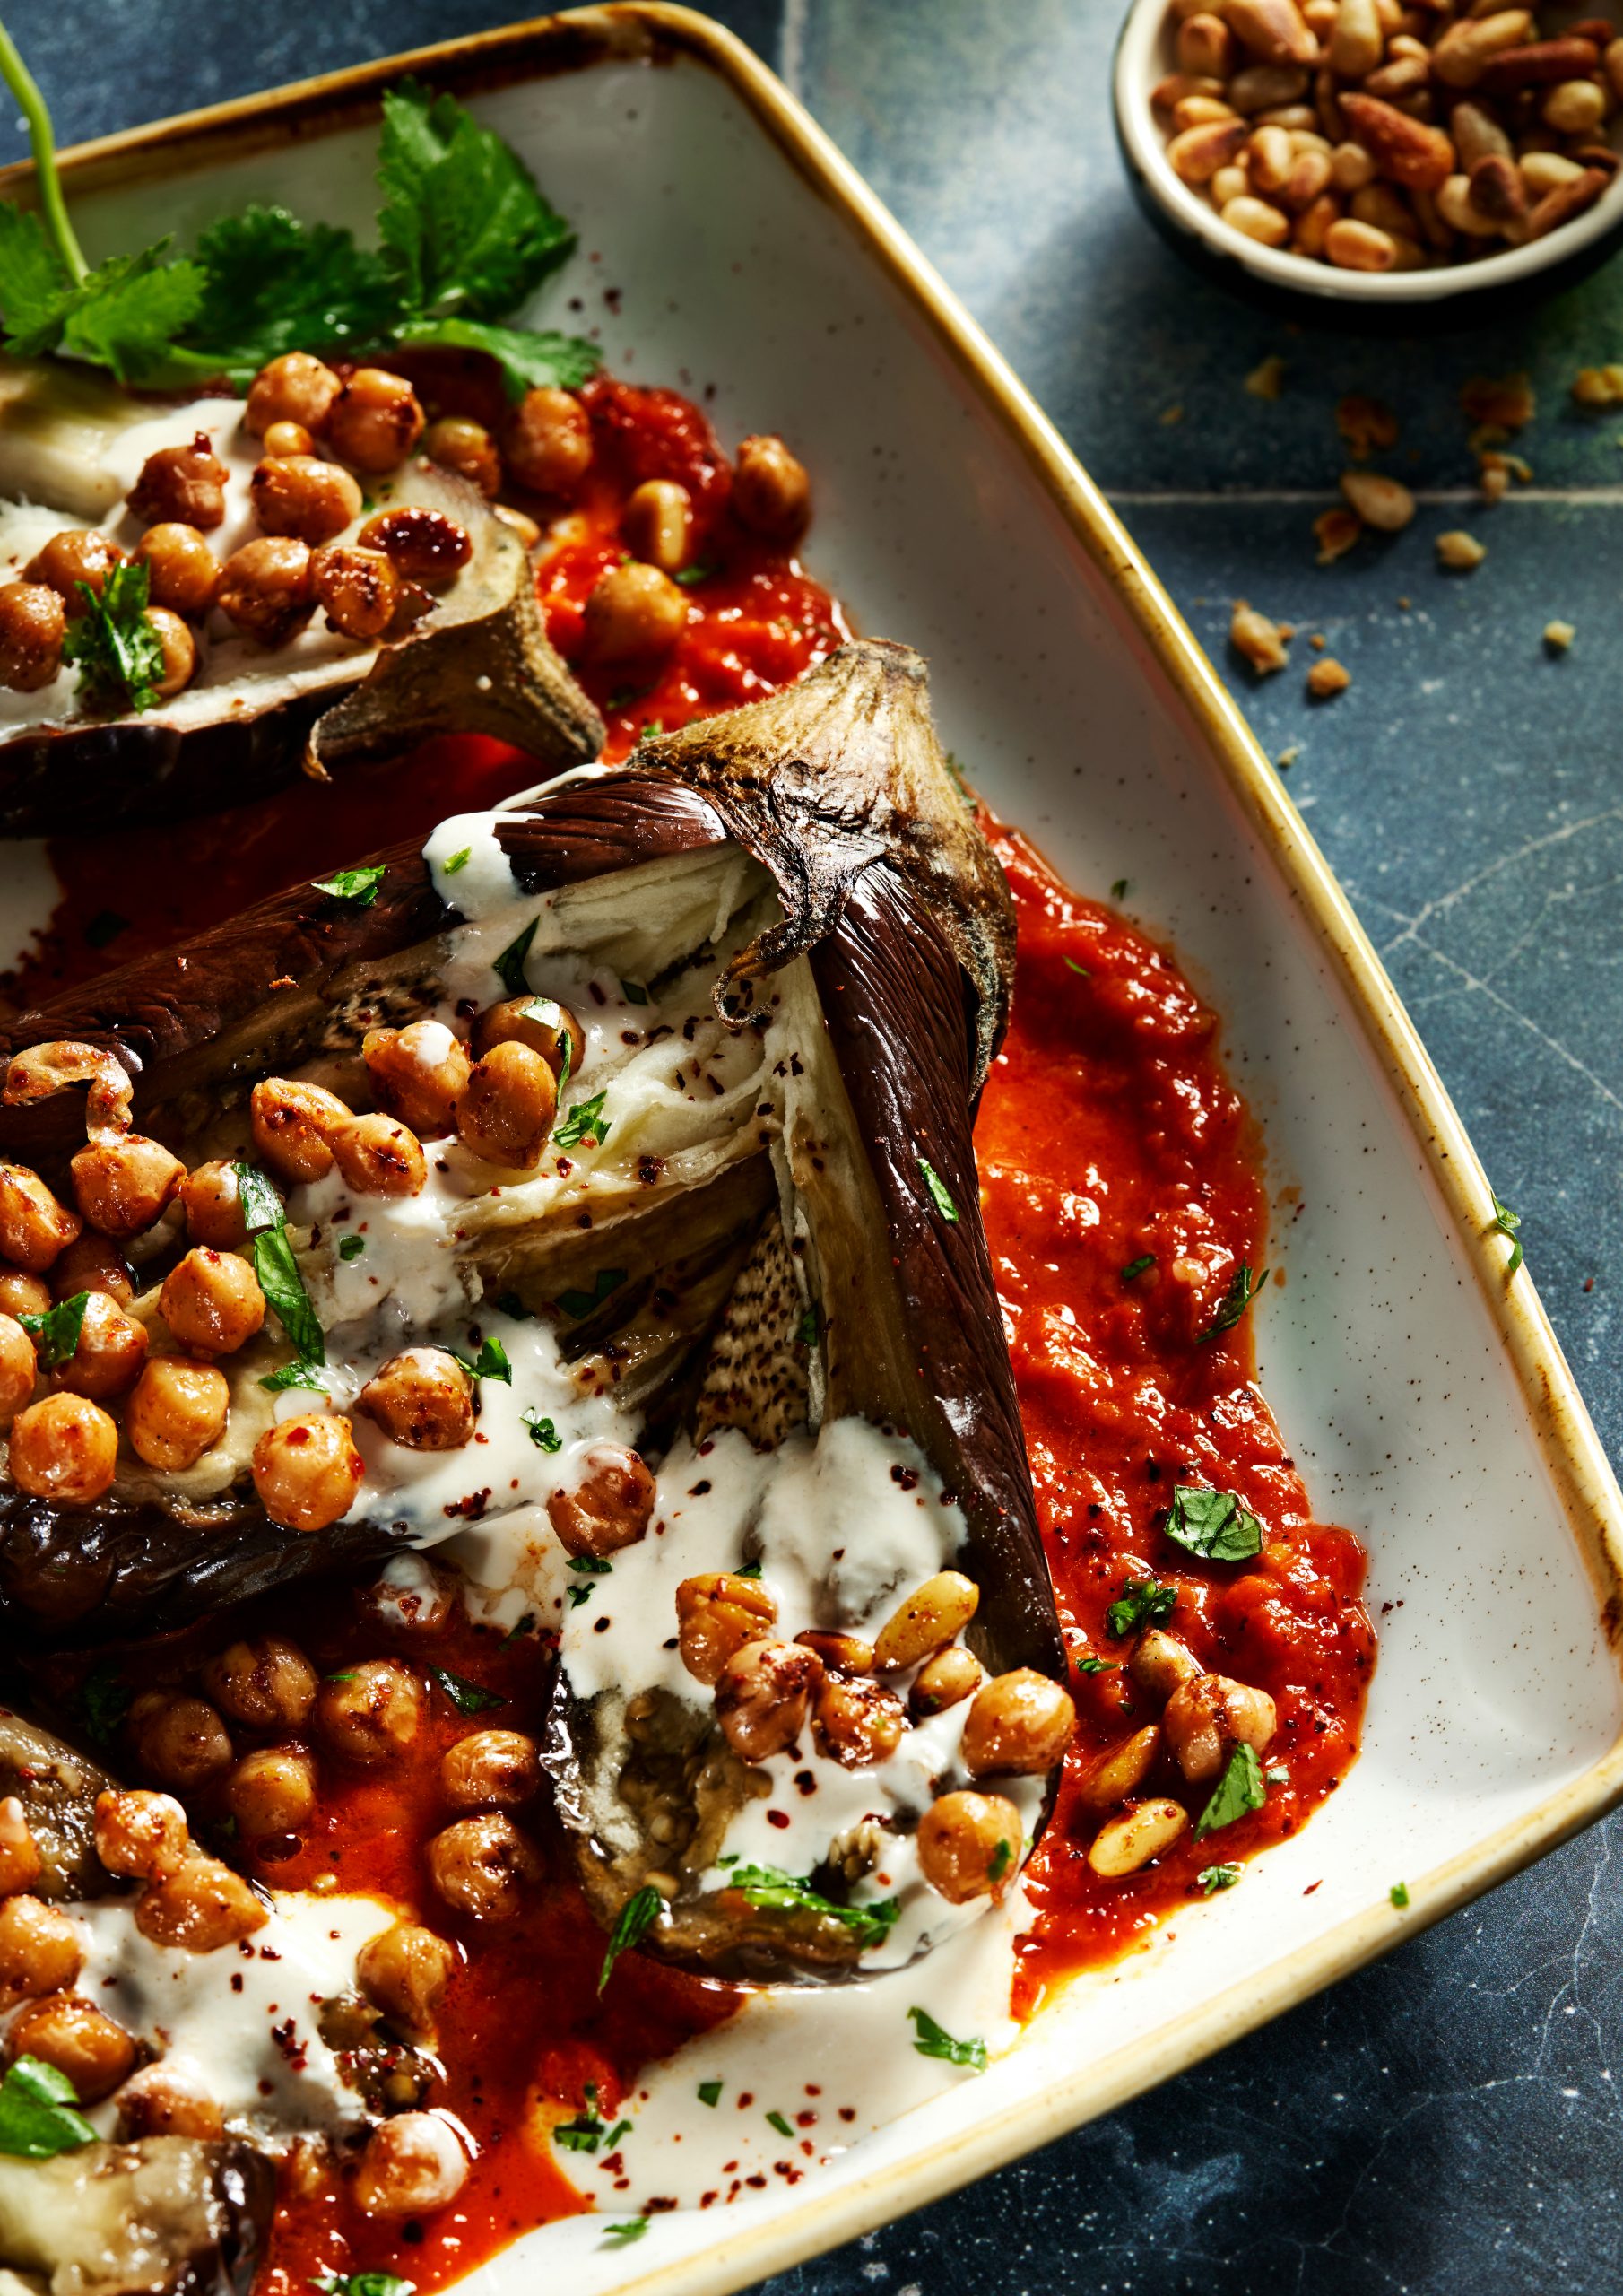 Stuffed aubergine with chickpeas and tomato sauce